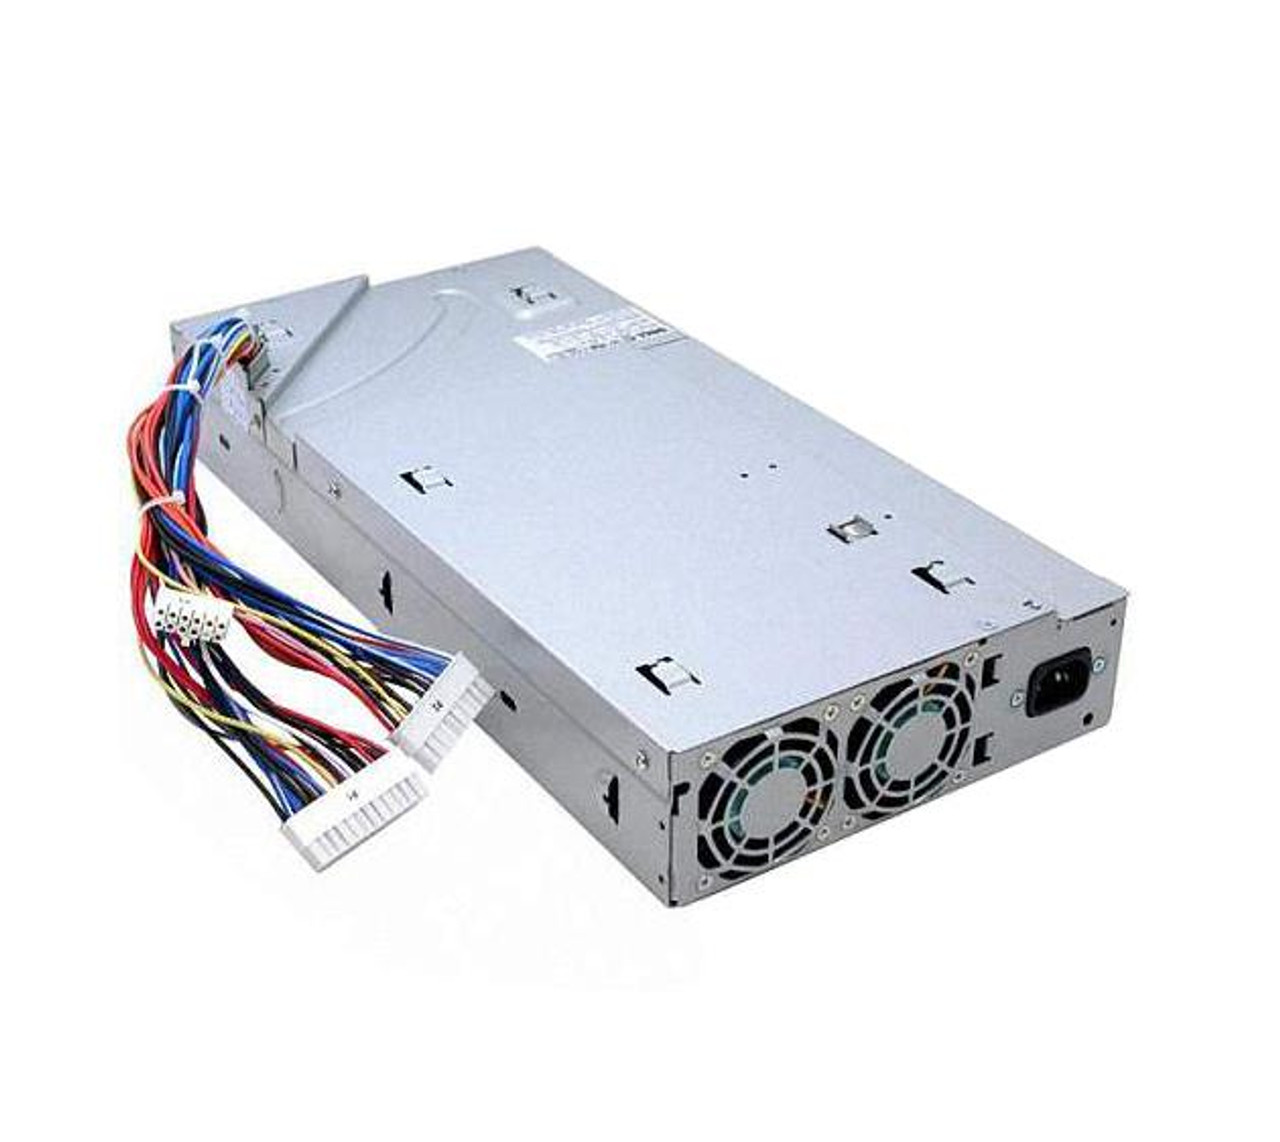 08XEV-06 Dell 460-Watts Power Supply for Precision 530 540 WorkStation